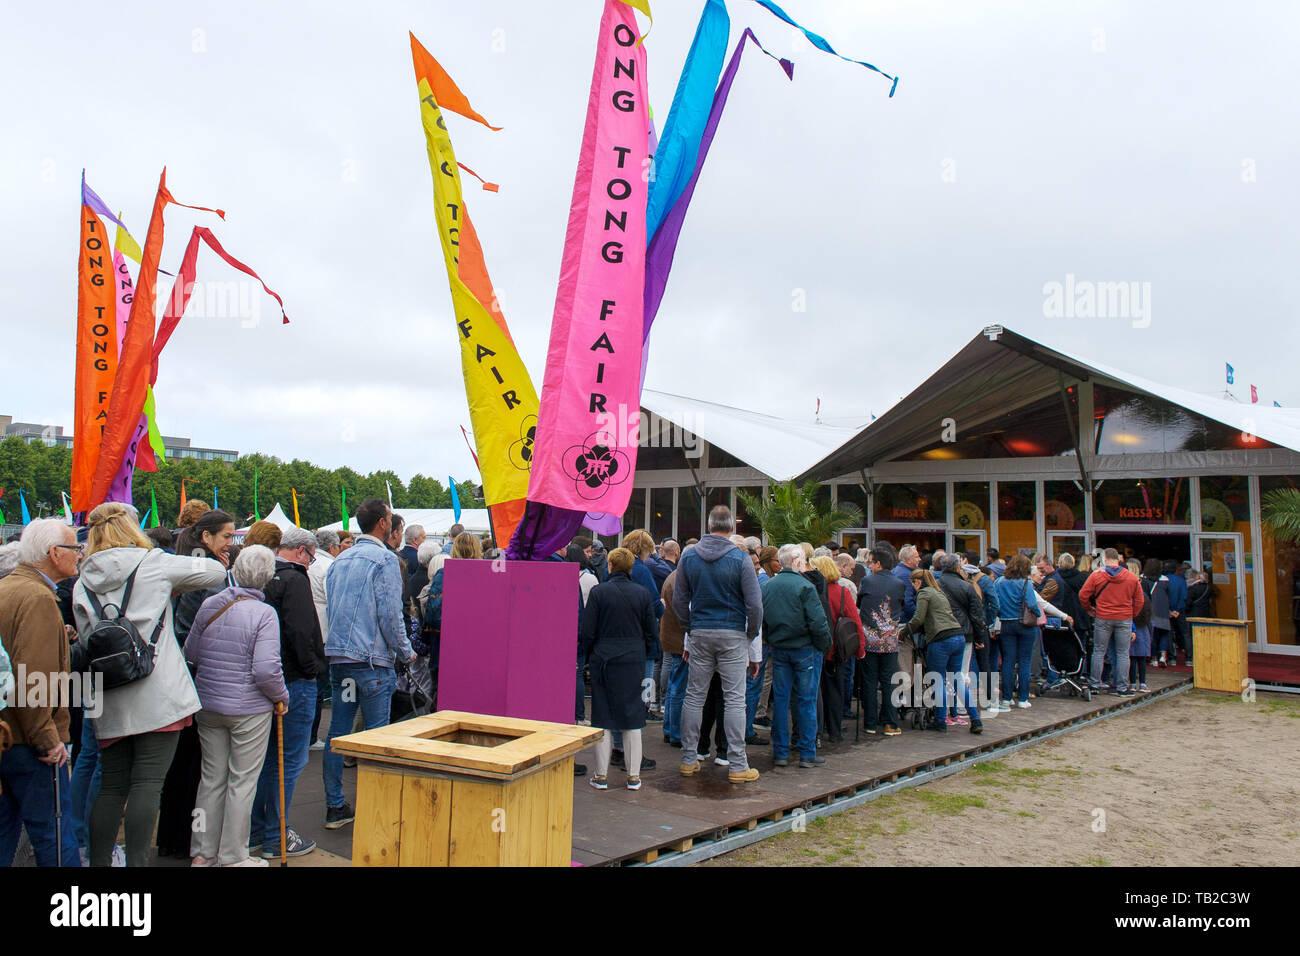 The Hague, Netherlands. 30th May, 2019. THE HAGUE, 30-05-2019, Tong Tong  Fair, Malieveld, Entre Credit: Pro Shots/Alamy Live News Stock Photo - Alamy